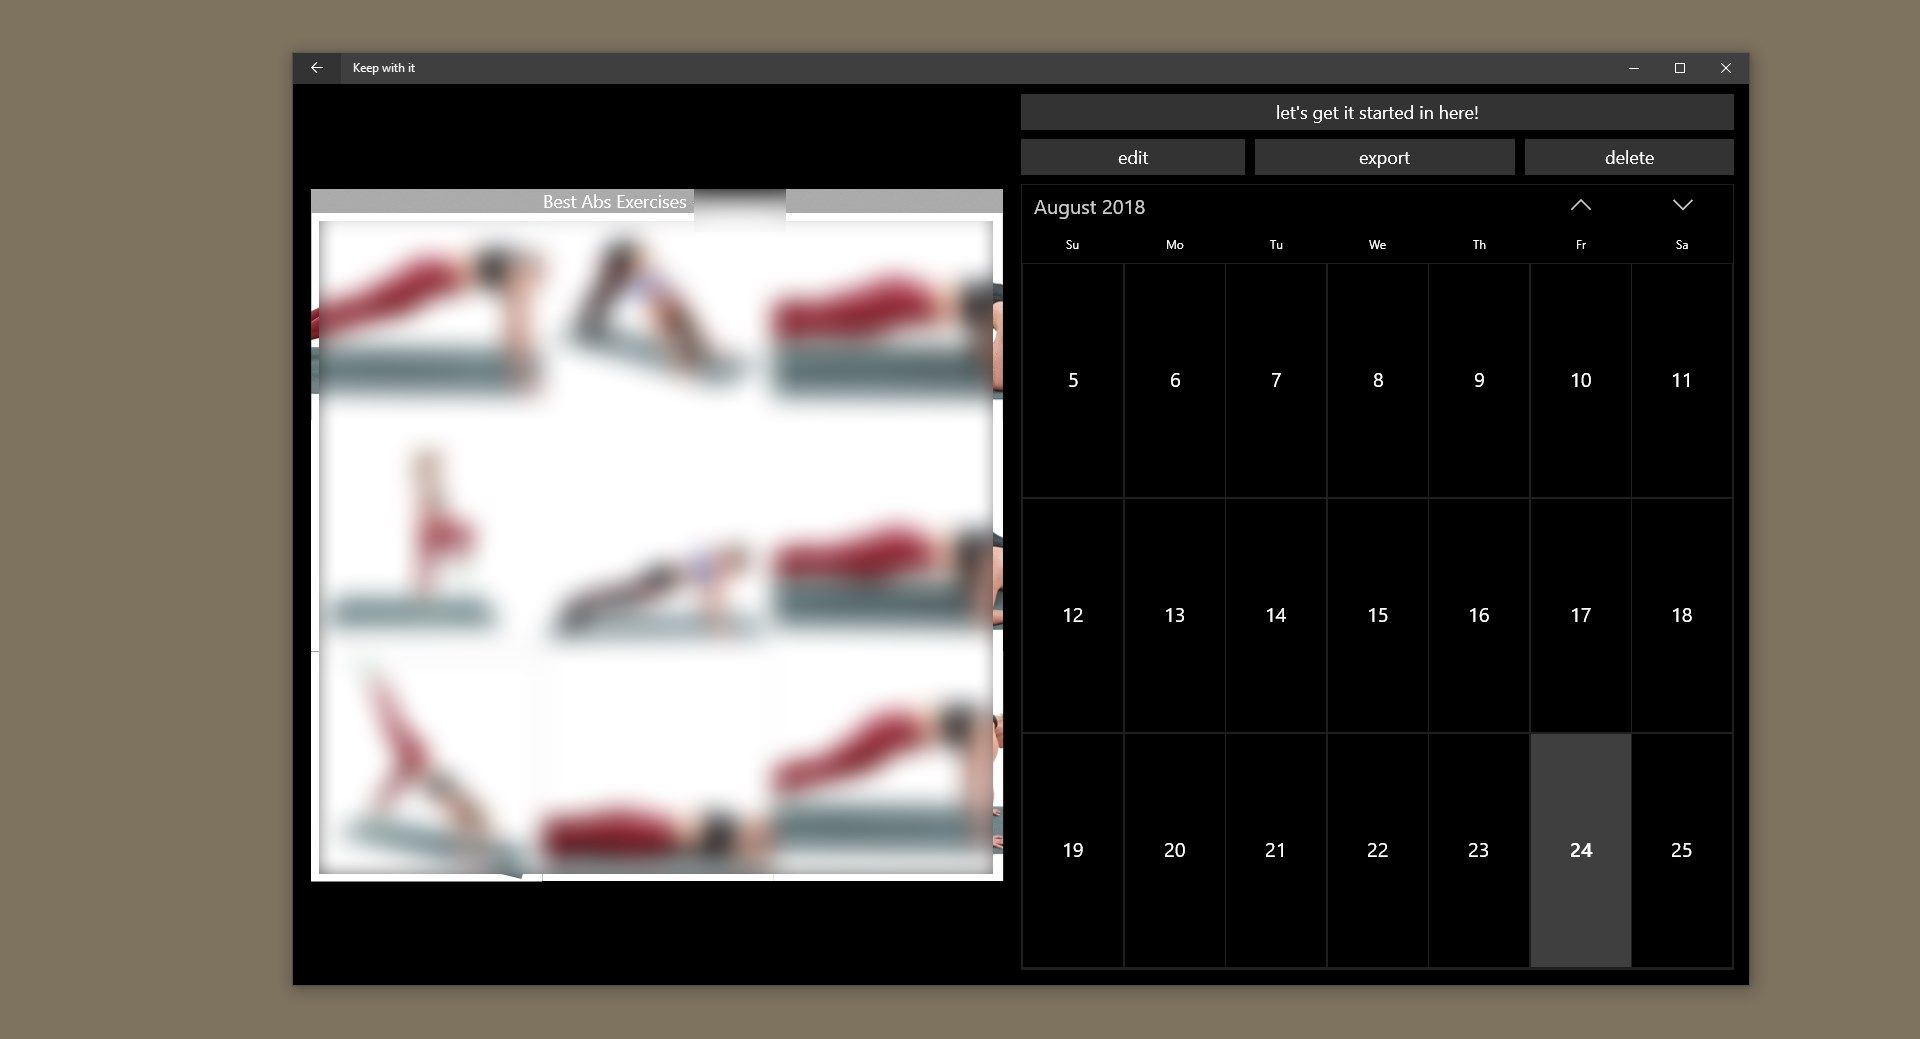 Track what you've done with a calendar, done for you automatically.